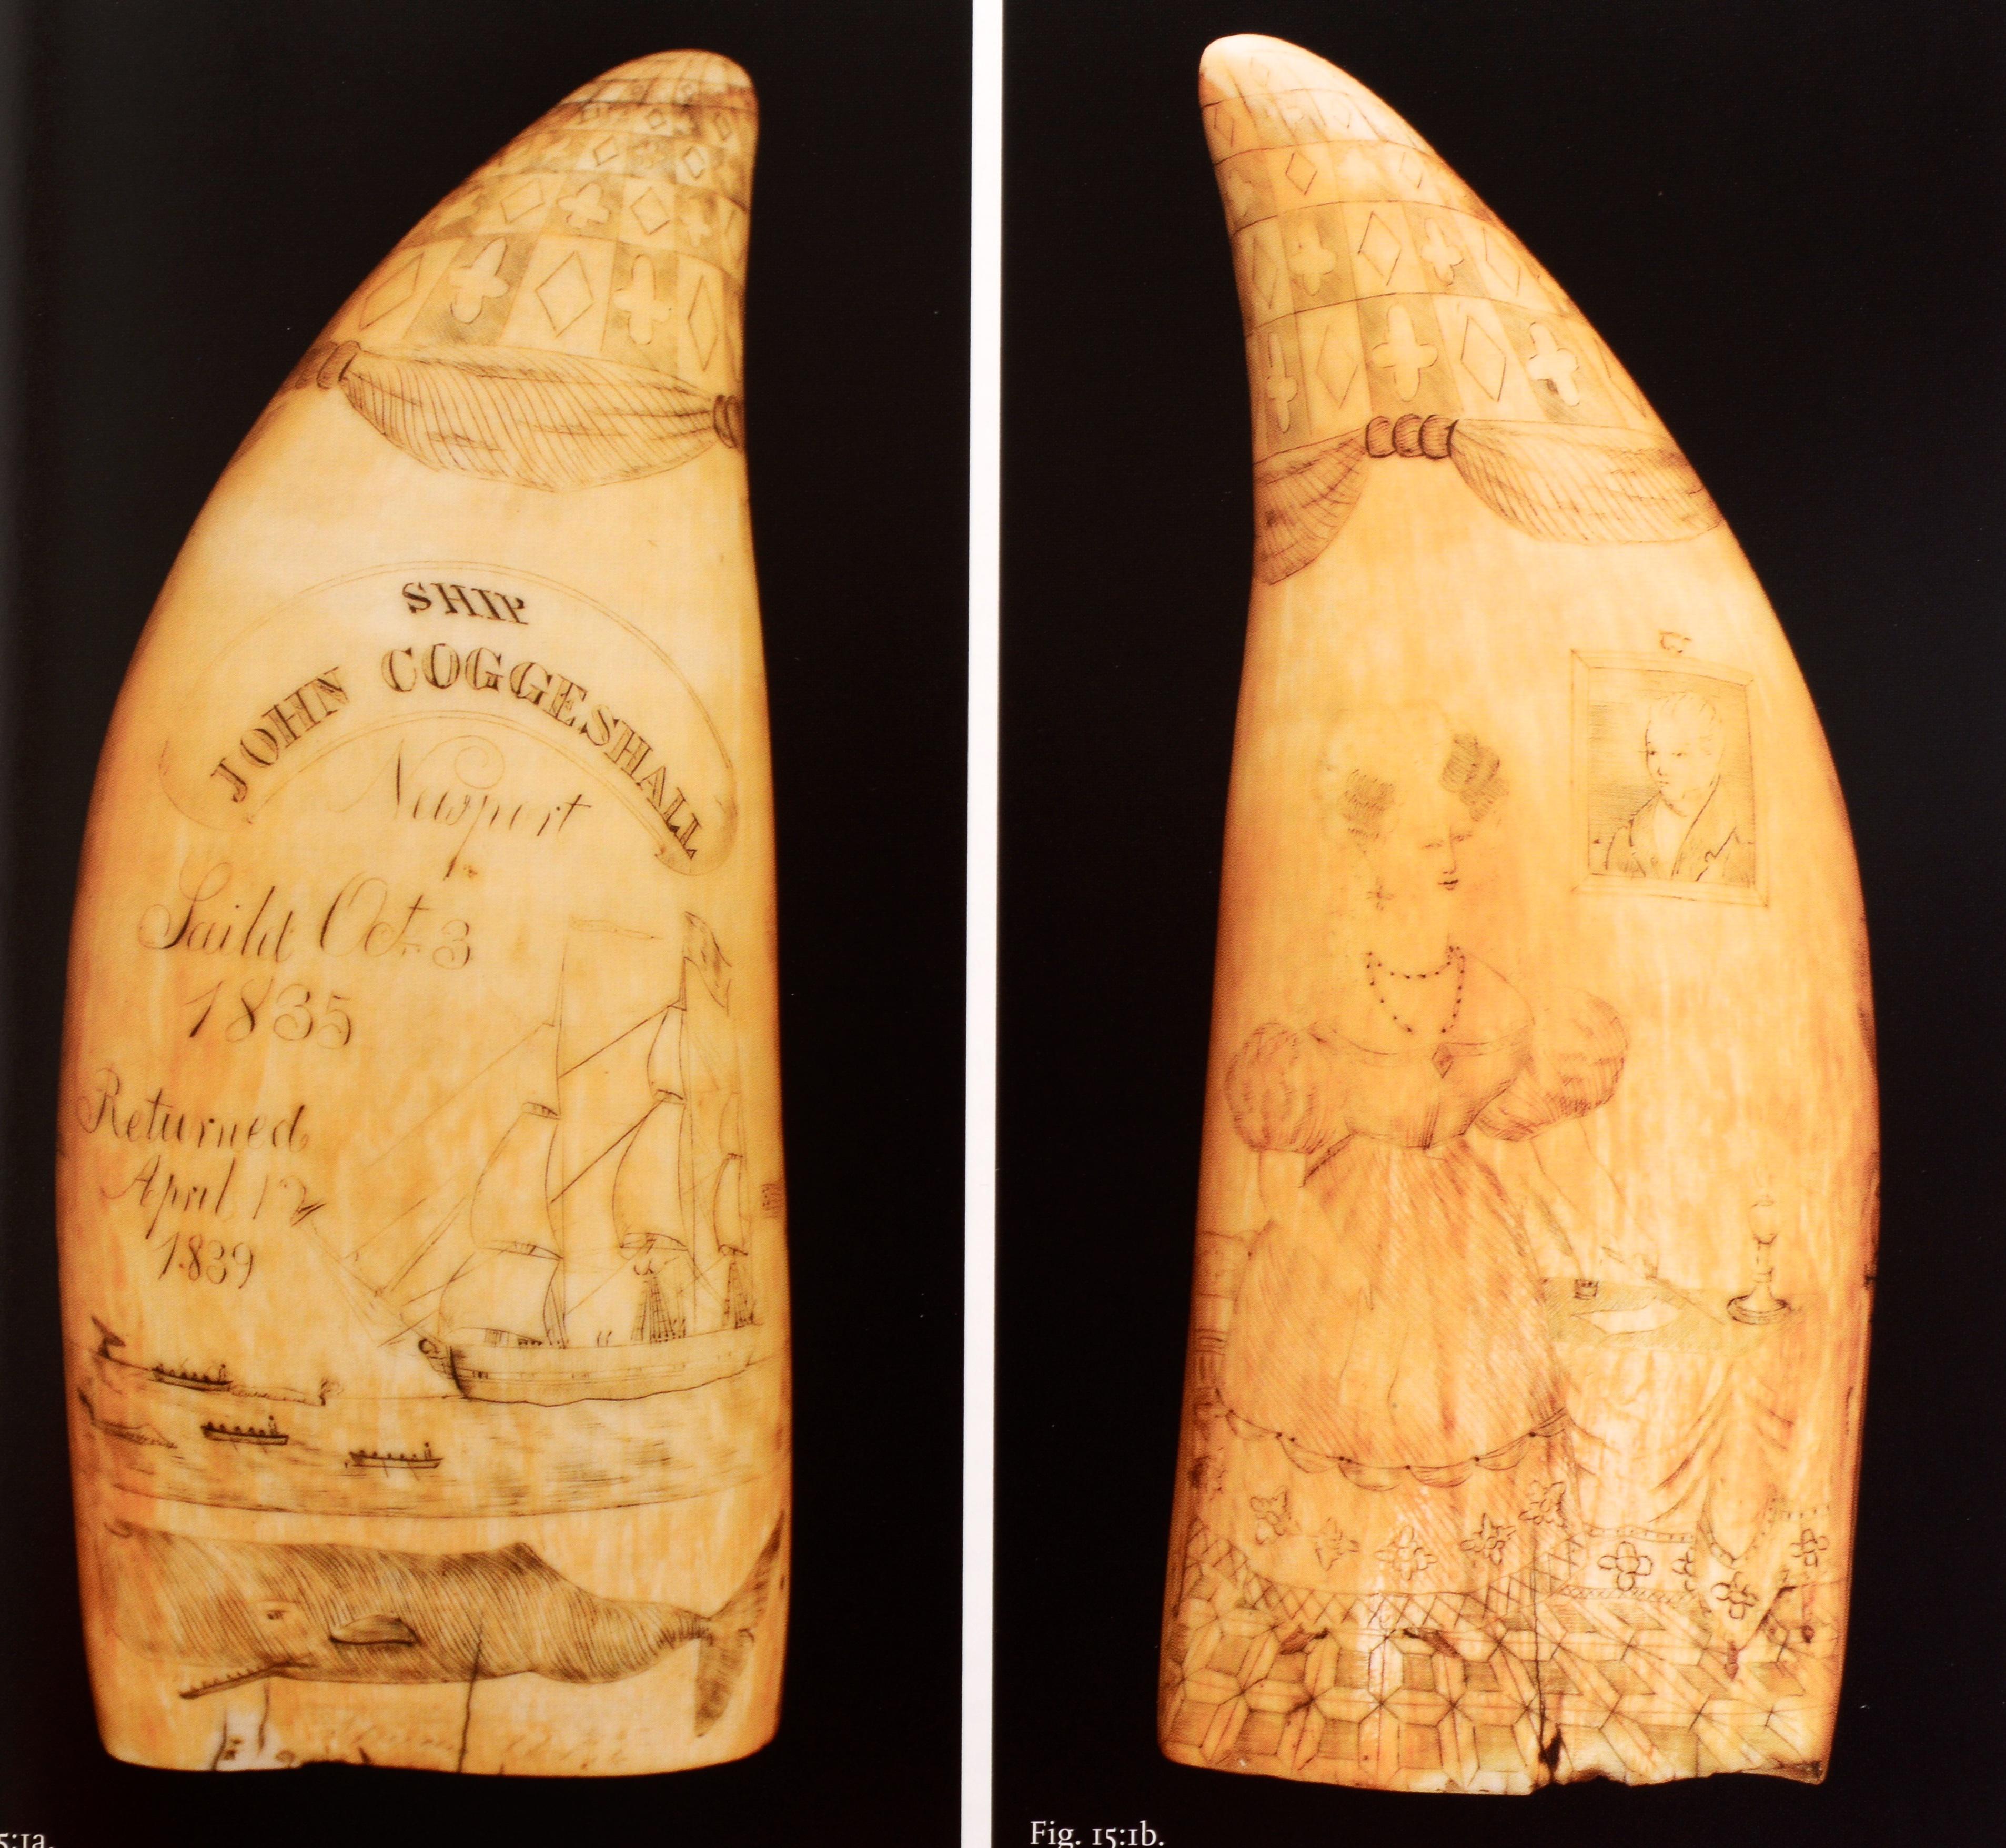 Contemporary Ingenious Contrivances, Curiously Carved Scrimshaw, New Bedford Whaling Museum For Sale